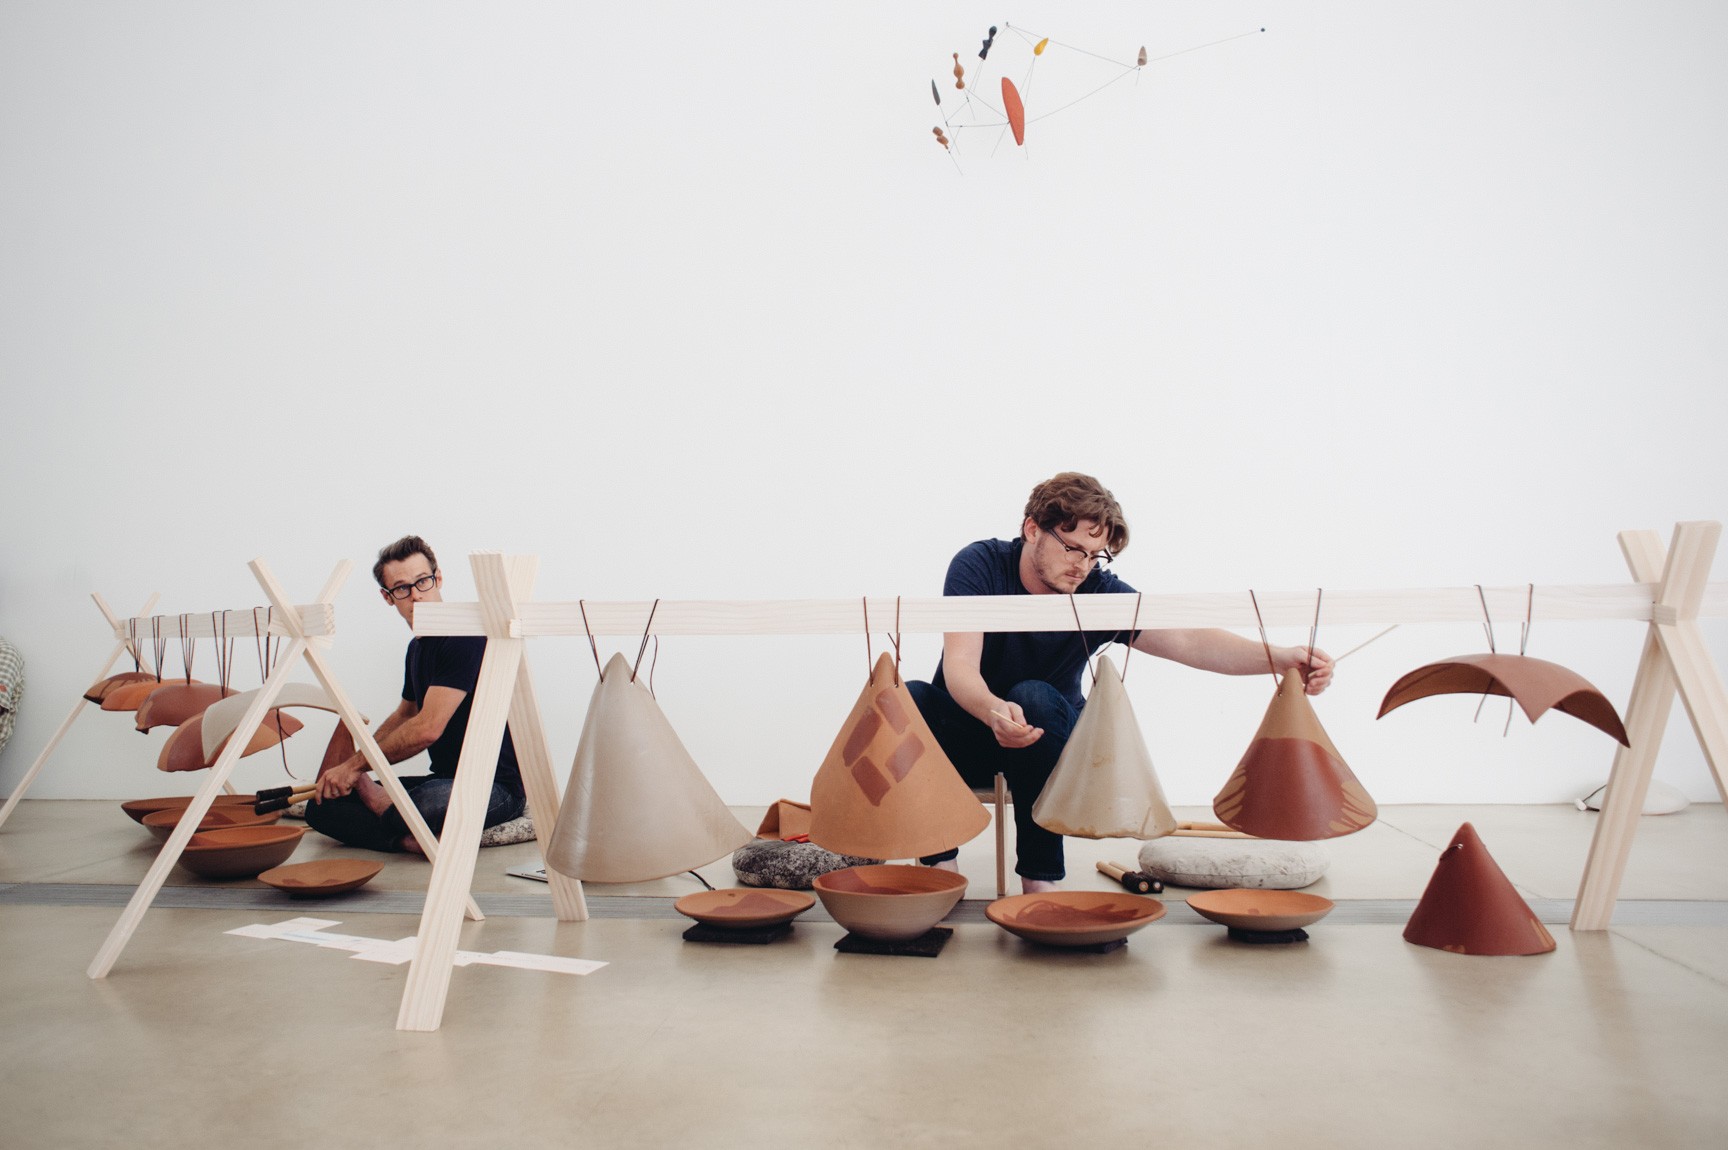 Chris Kallmyer and an assistant kneel behind a white beam holding hanging clay instruments, using percussive sticks to tap the clay.